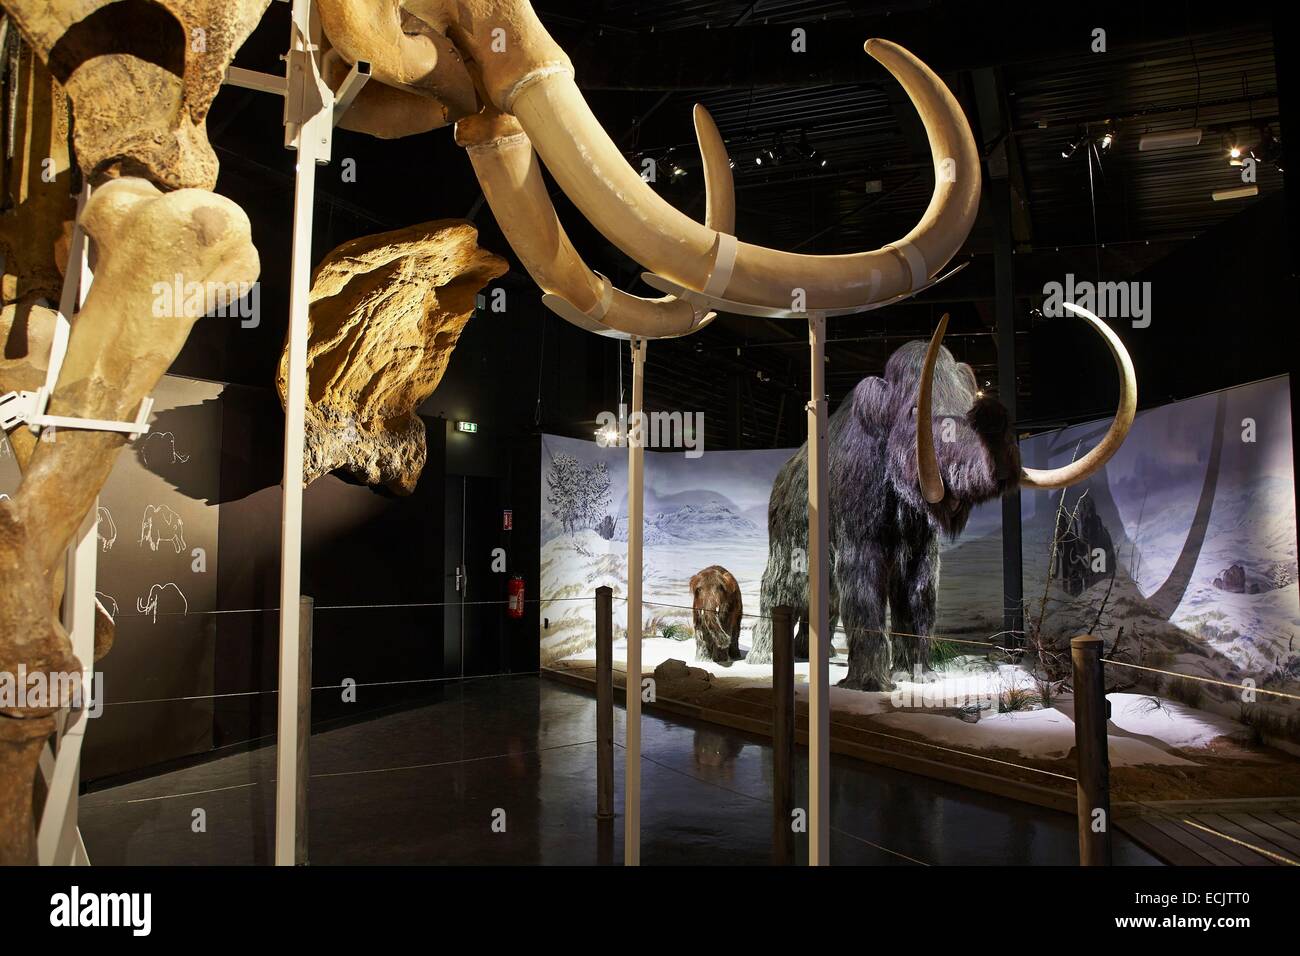 France, Ariege, Tarascon, Prehistoric Park, Museographic Area, Giants of the Ice Age, Skeleton of Woolly mammoth (Mammuthus primigenius) Stock Photo